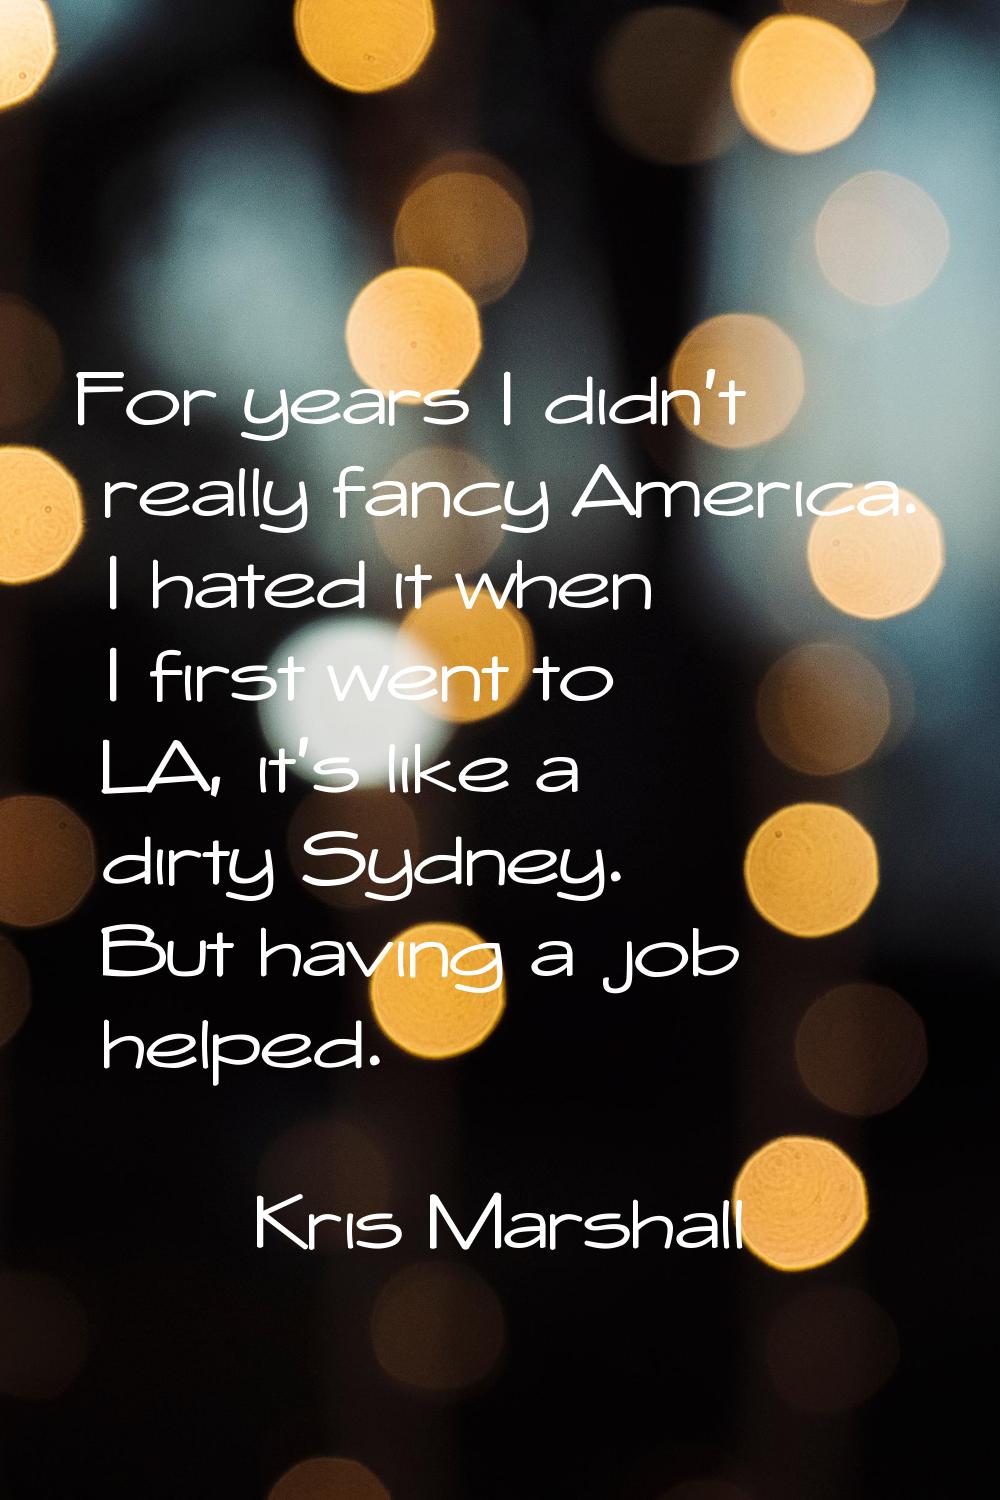 For years I didn't really fancy America. I hated it when I first went to LA, it's like a dirty Sydn